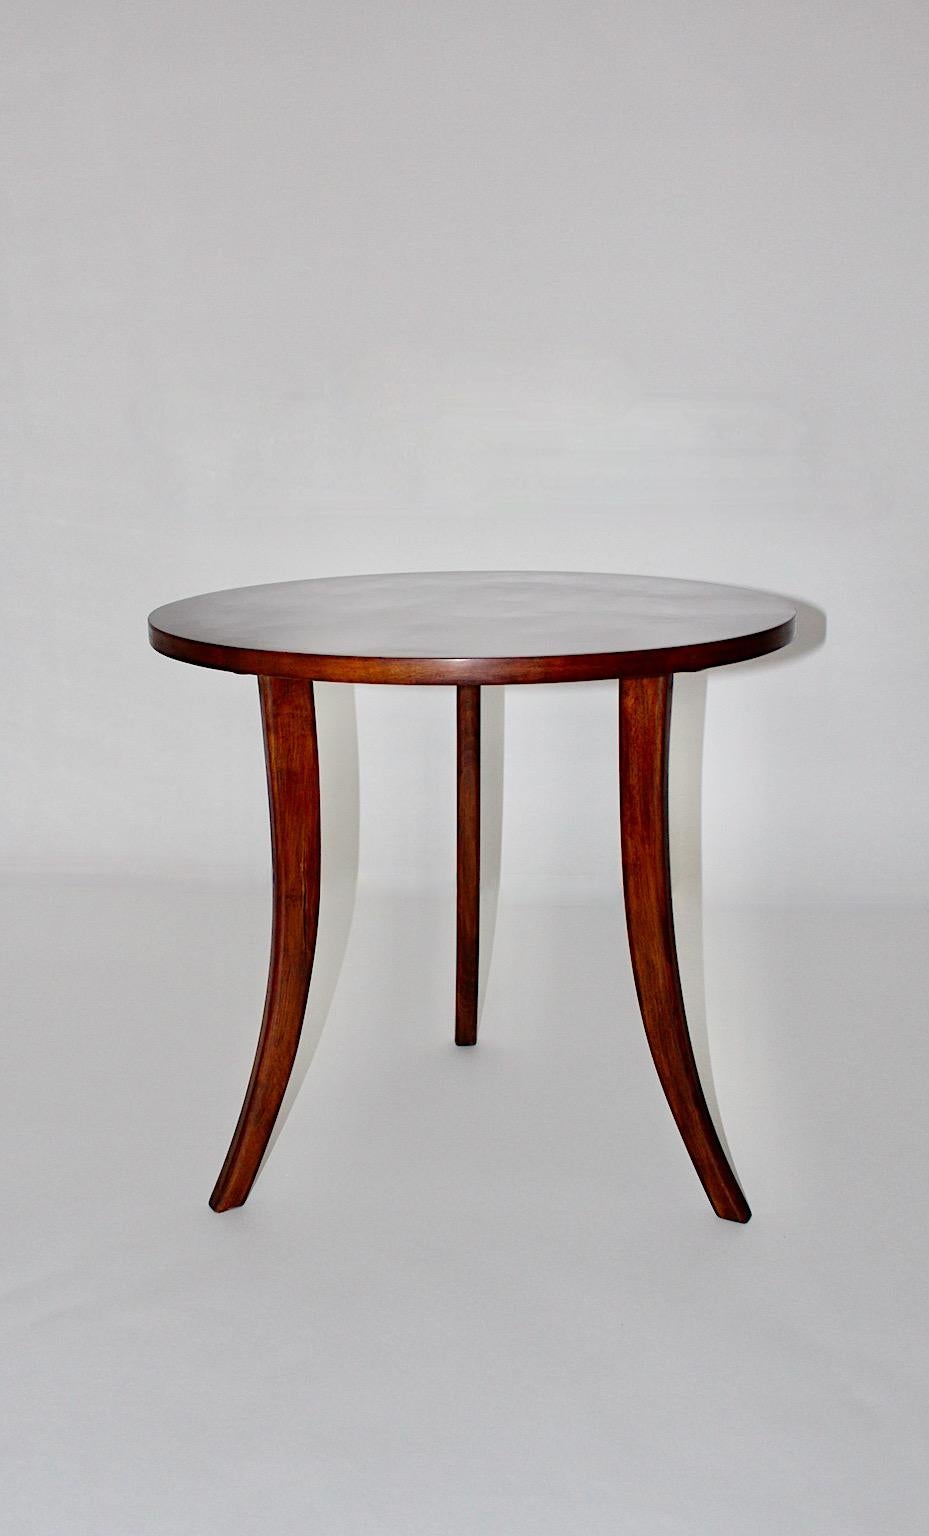 Art Deco vintage coffee table or side table from walnut in brown color by Josef Frank 1930s Vienna.
A stunning coffee table or side table by Josef Frank 1930s Vienna in beautiful warm chocolate brown color with three slightly curved legs.
This